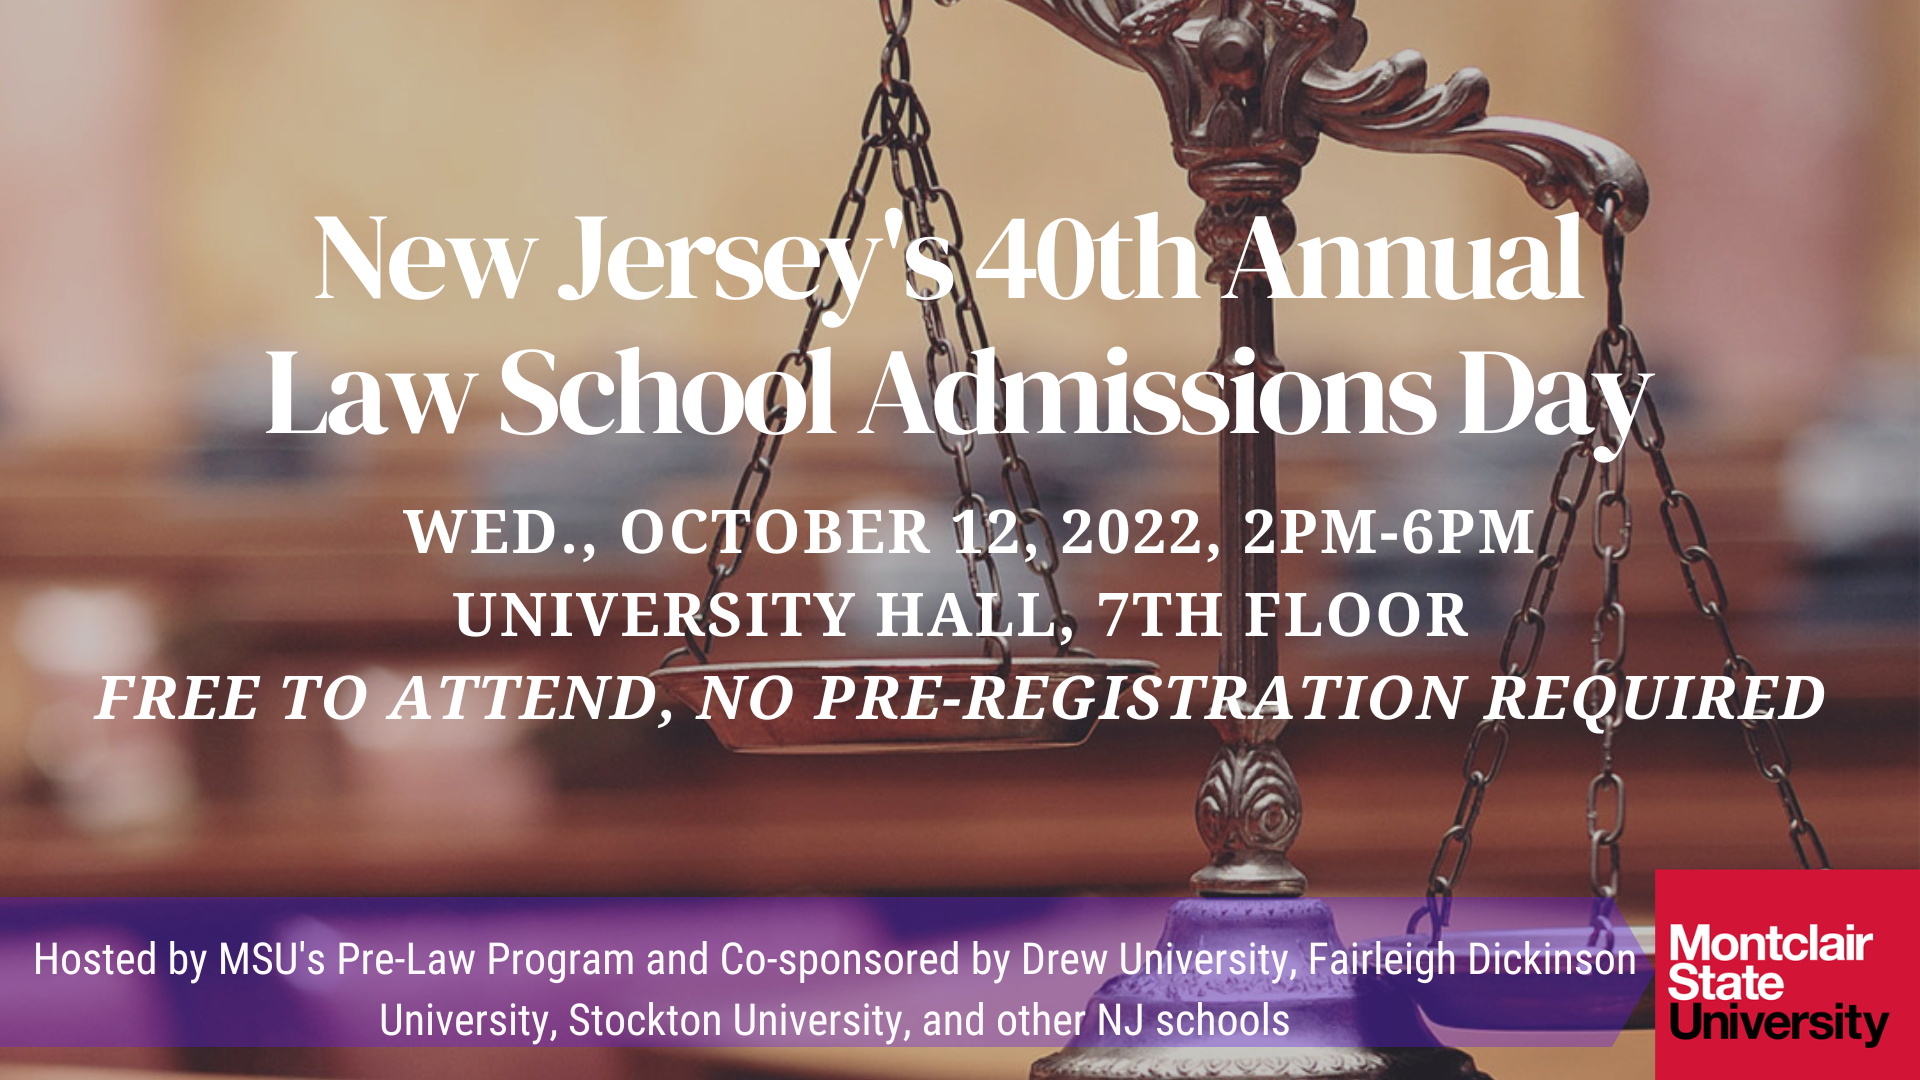 New Jersey's 40th Annual Law School Admissions Day University